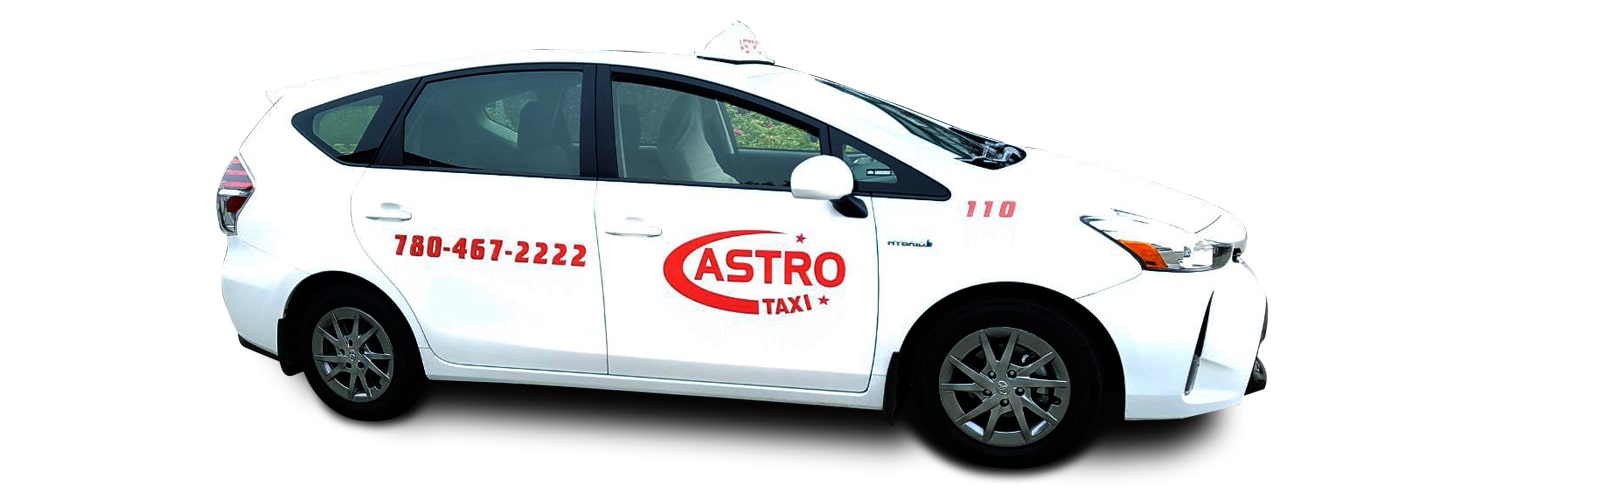 FLAT RIDE TAXI IN SHERWOOD PARK CALL US 780 467 2222